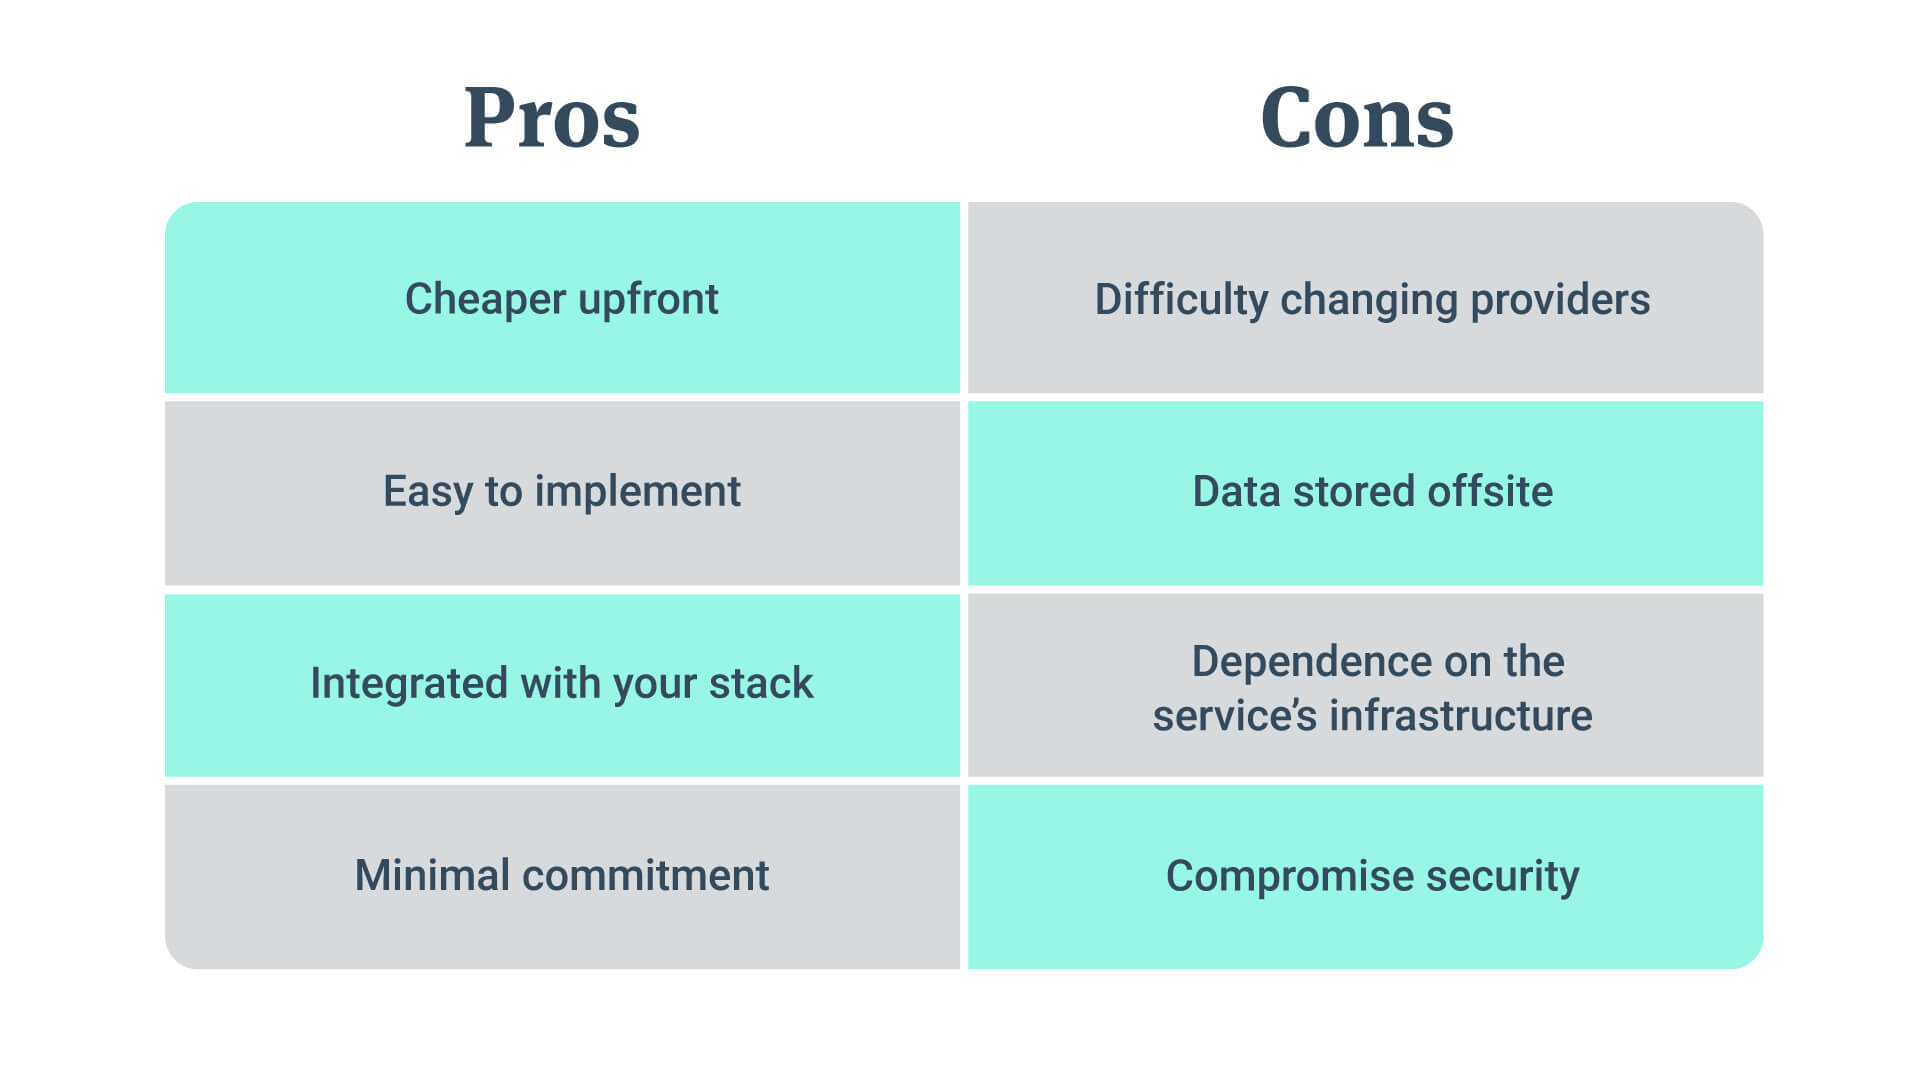 SaaS Pros and Cons